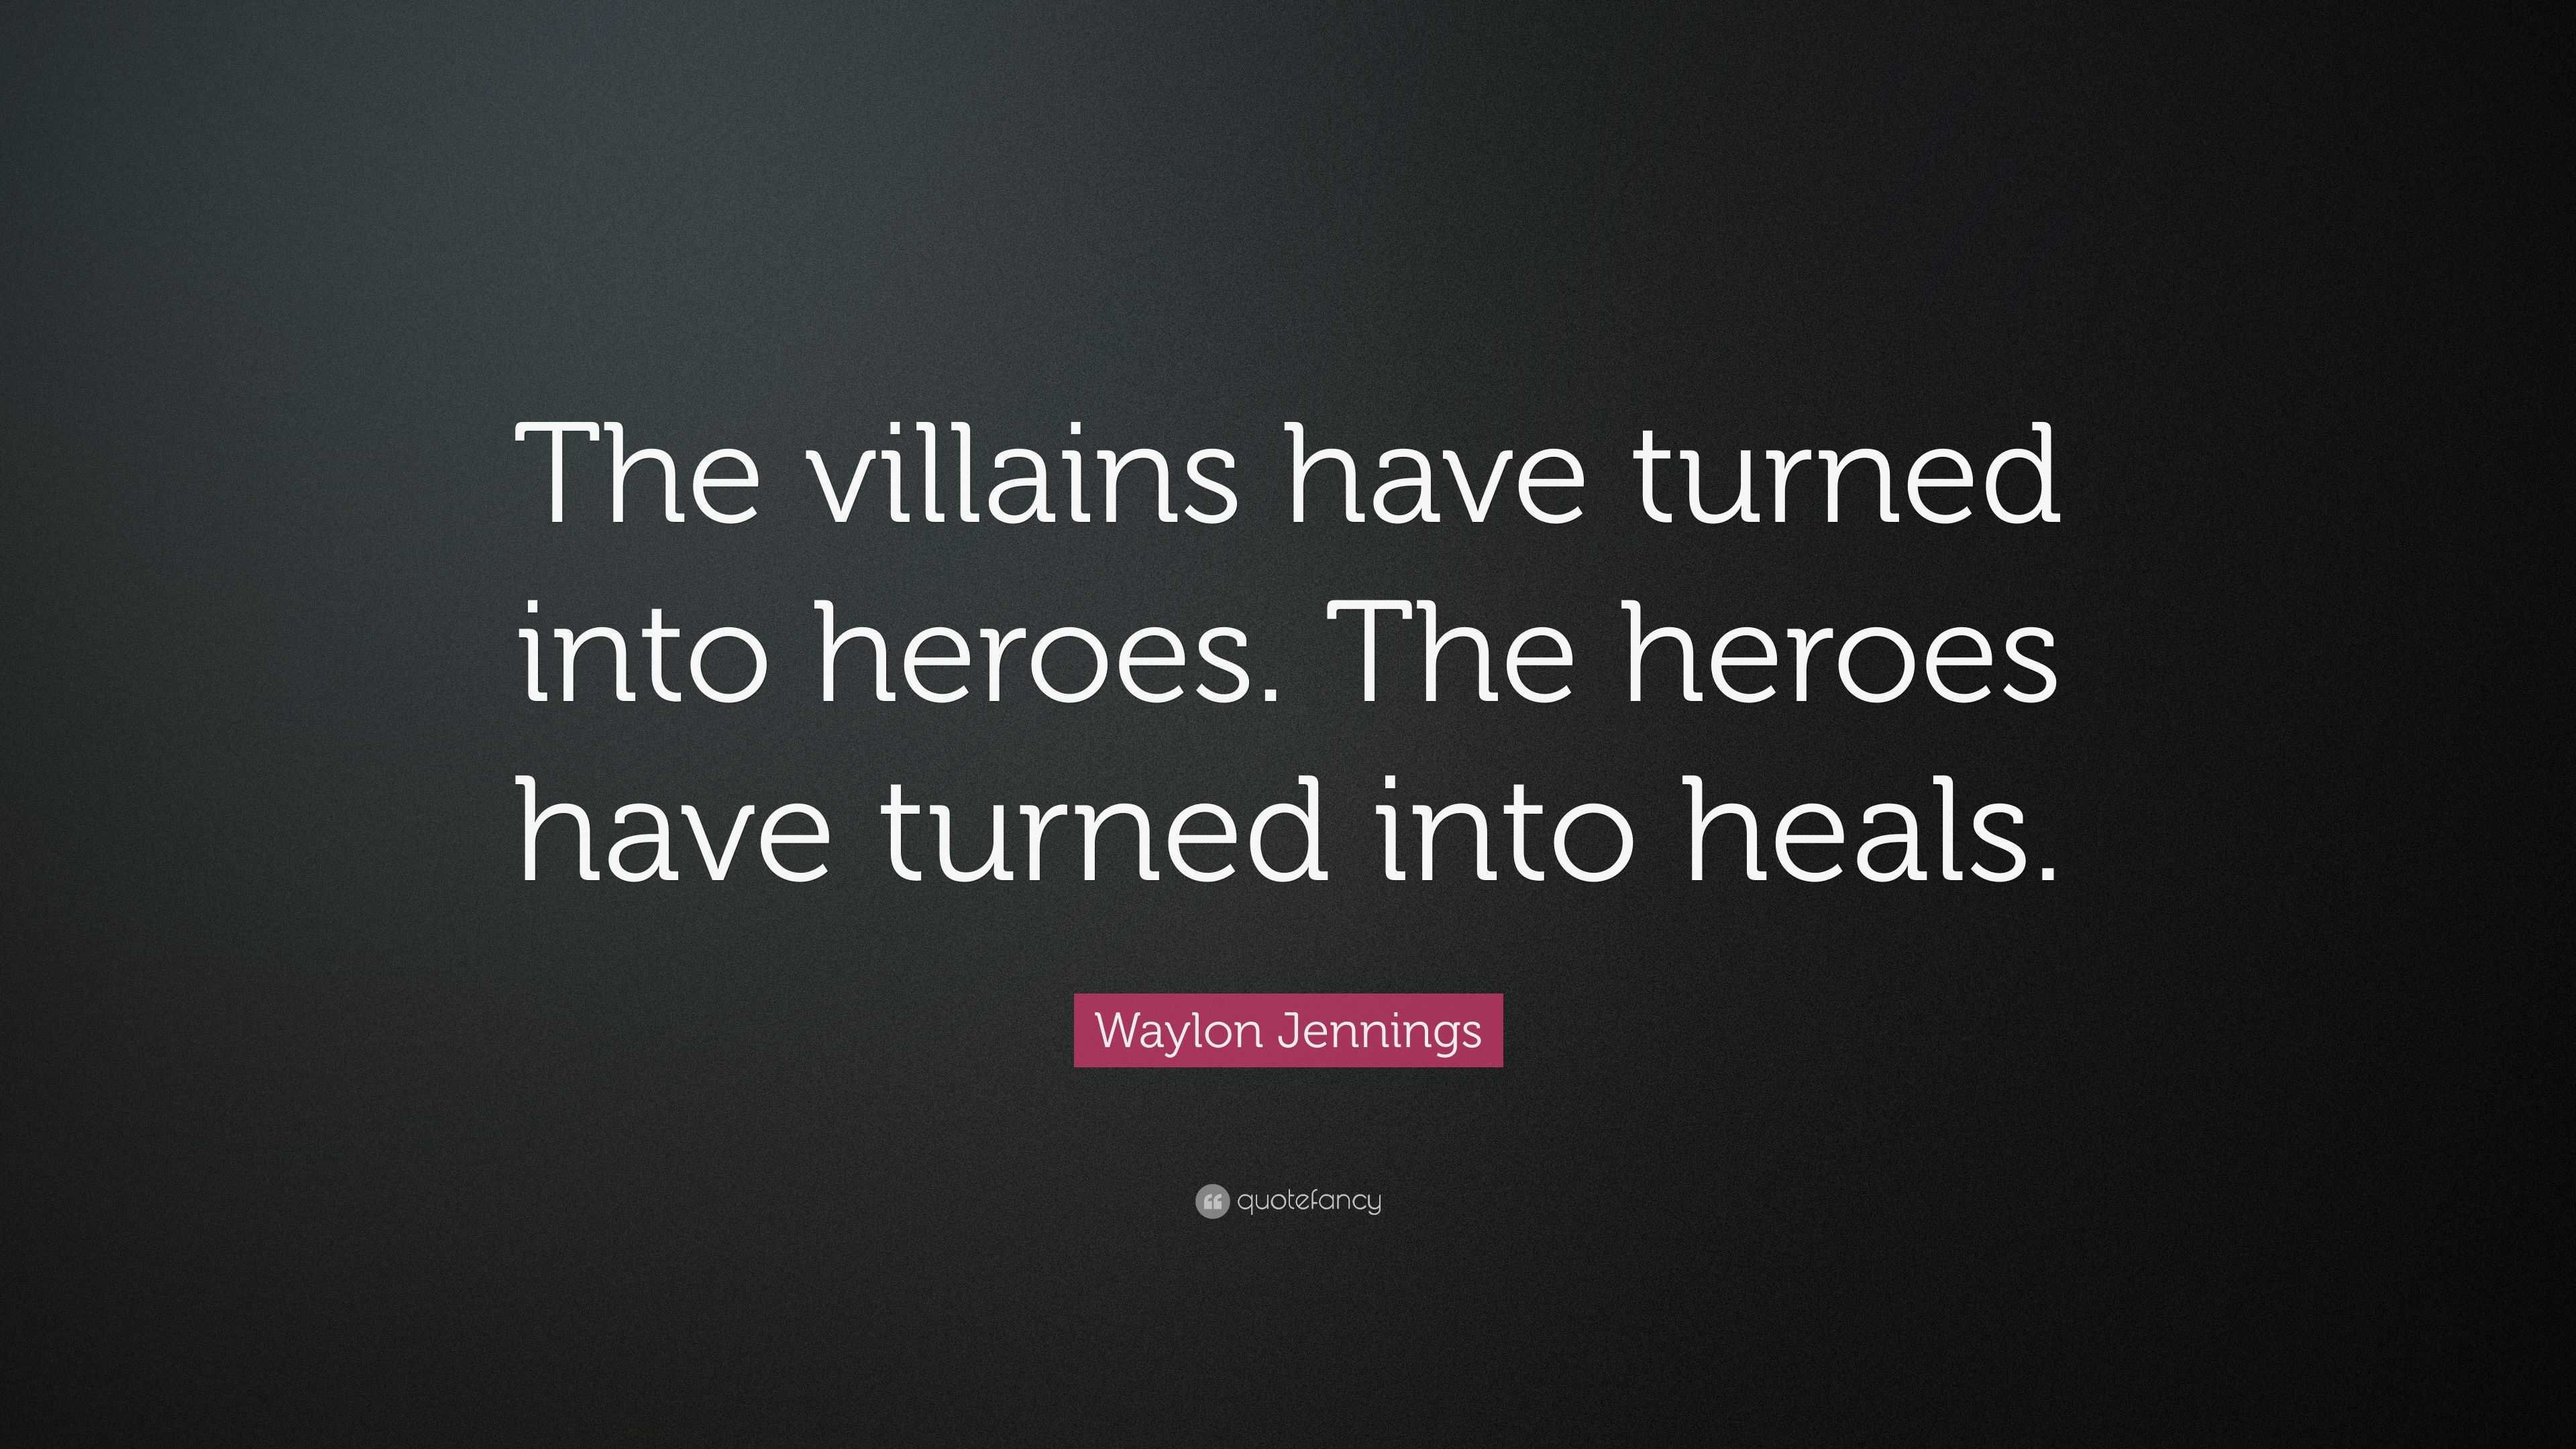 Waylon Jennings Quote: “The villains have turned into heroes. The ...